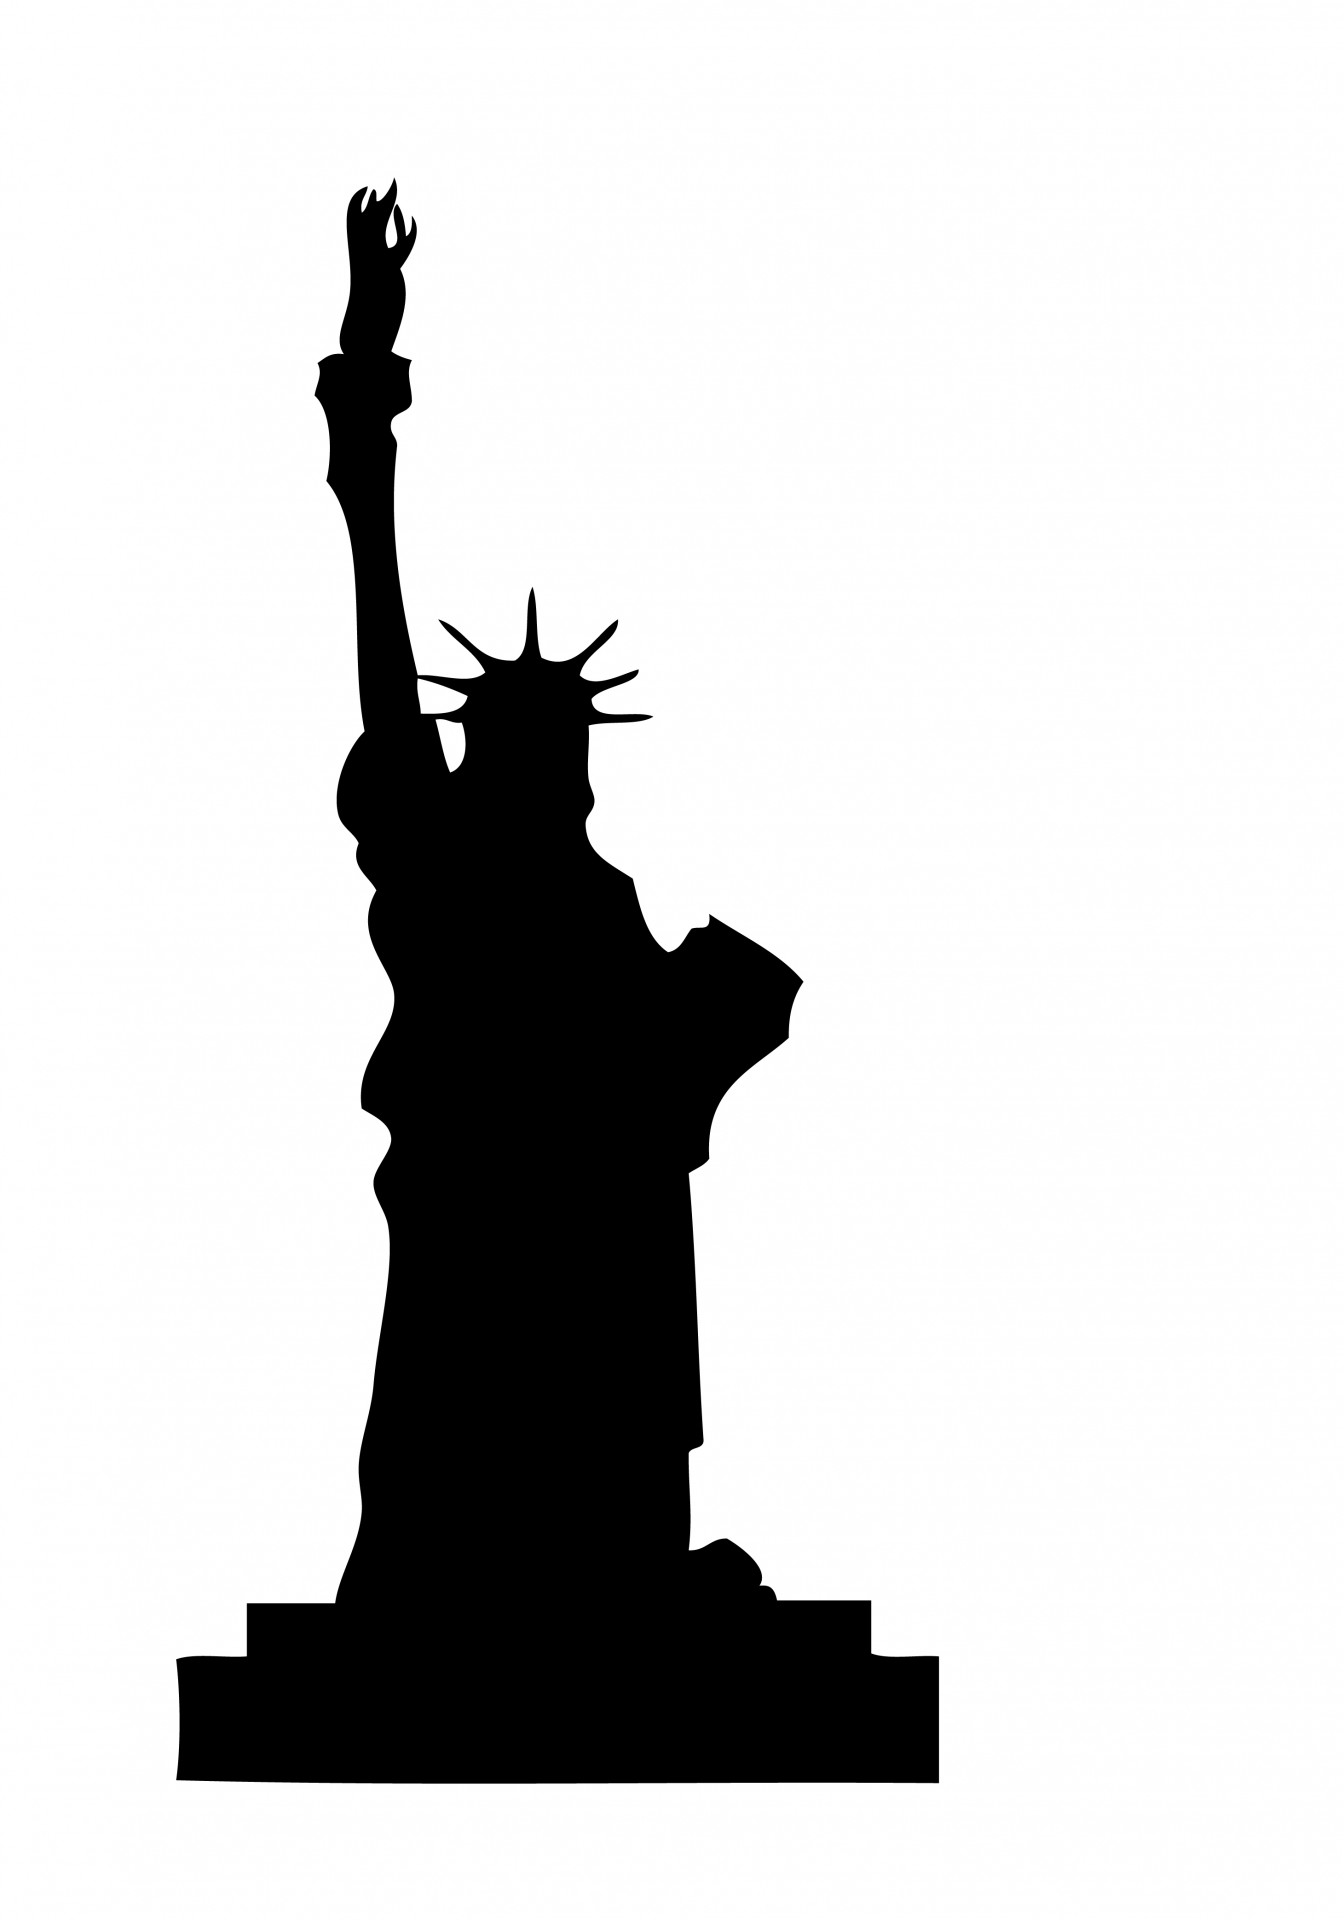 802 Statue Of Liberty free clipart.